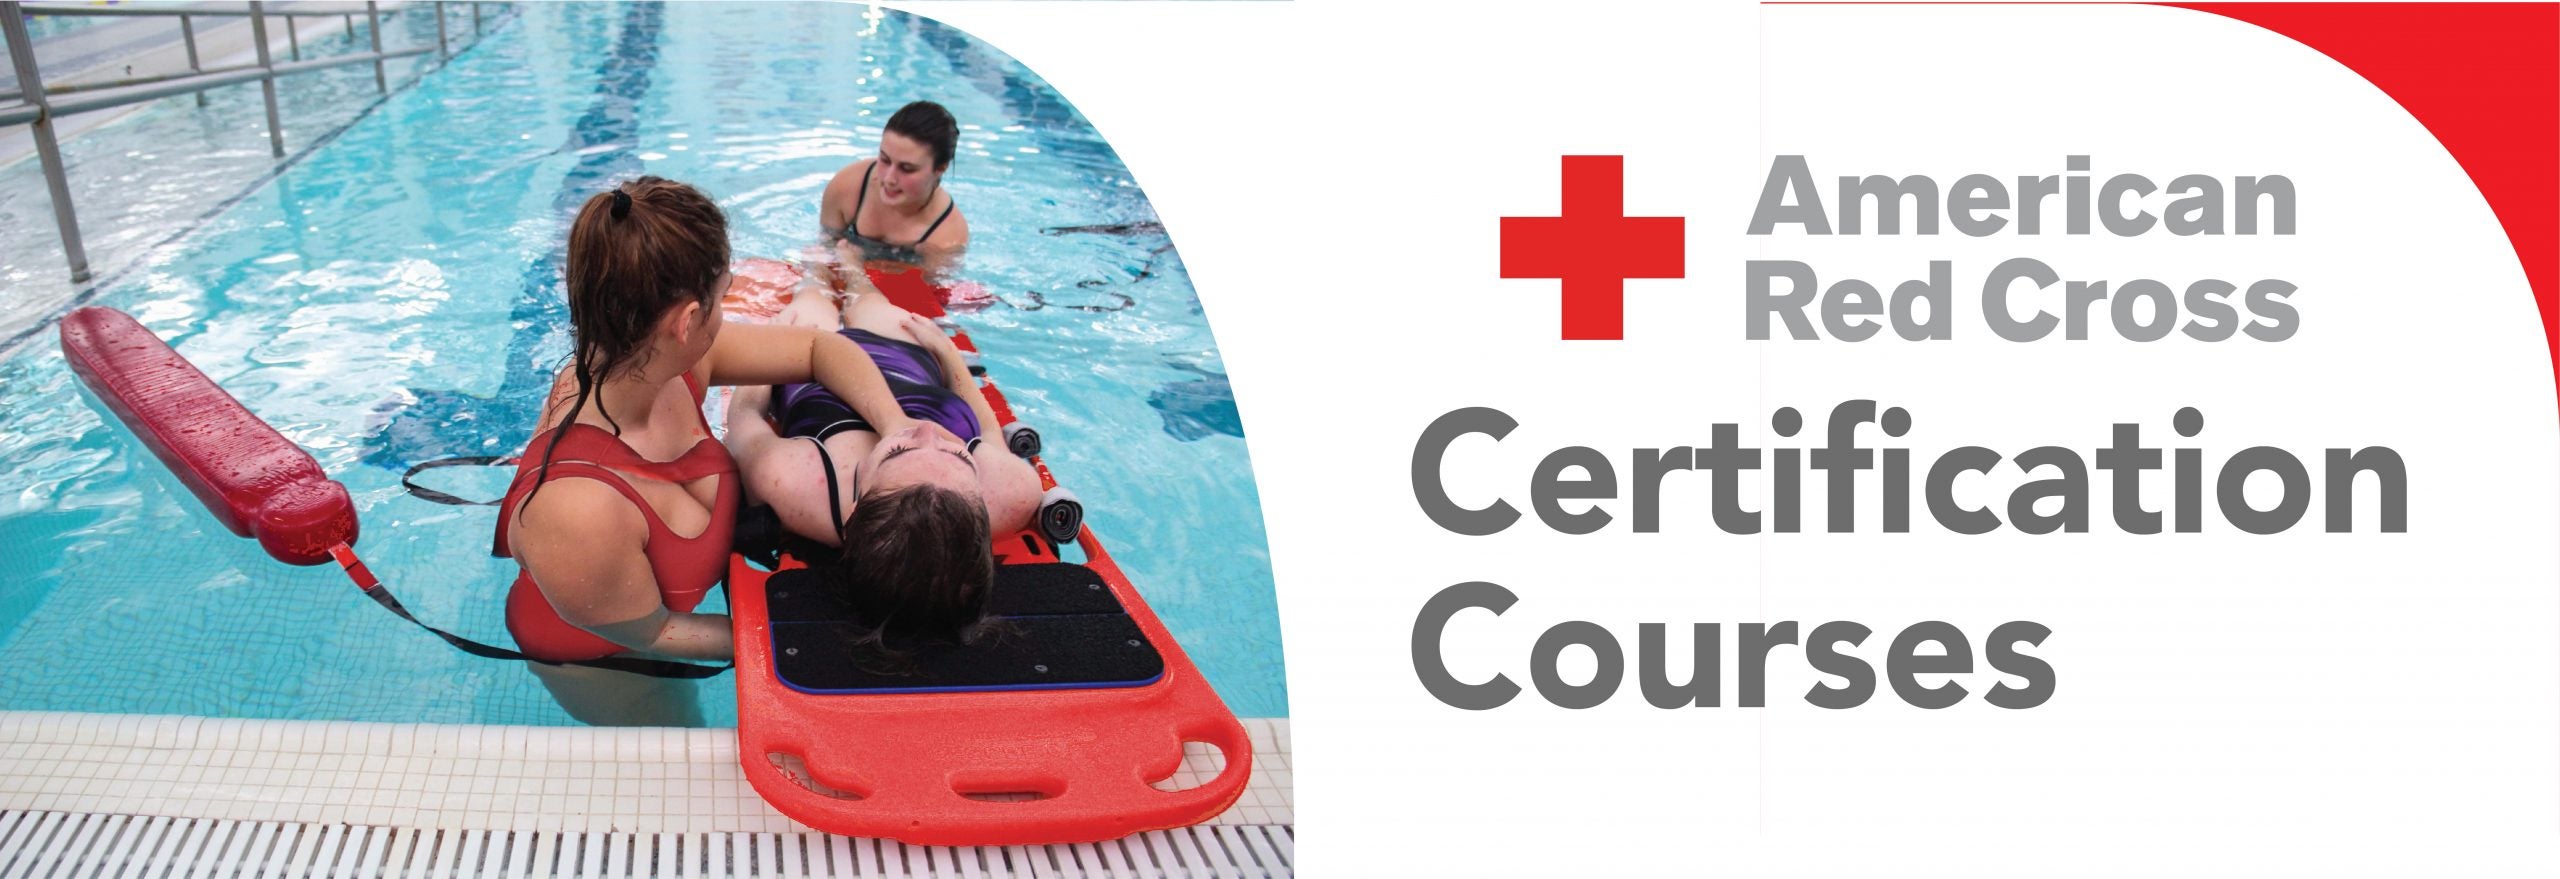 American Red Cross Certification Courses